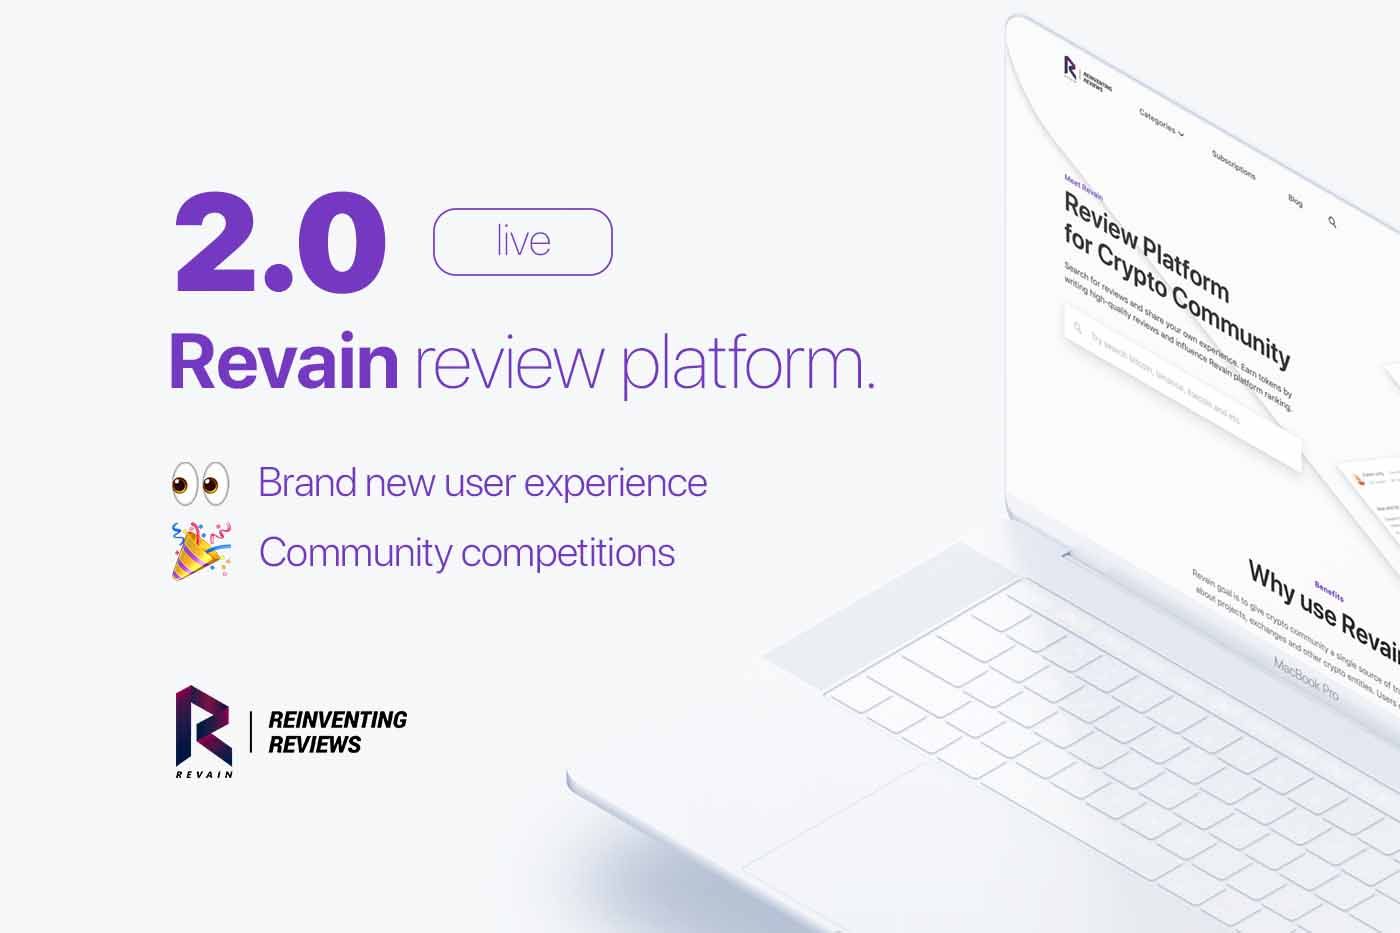 Meet Revain 2.0, reworked completely from the ground up